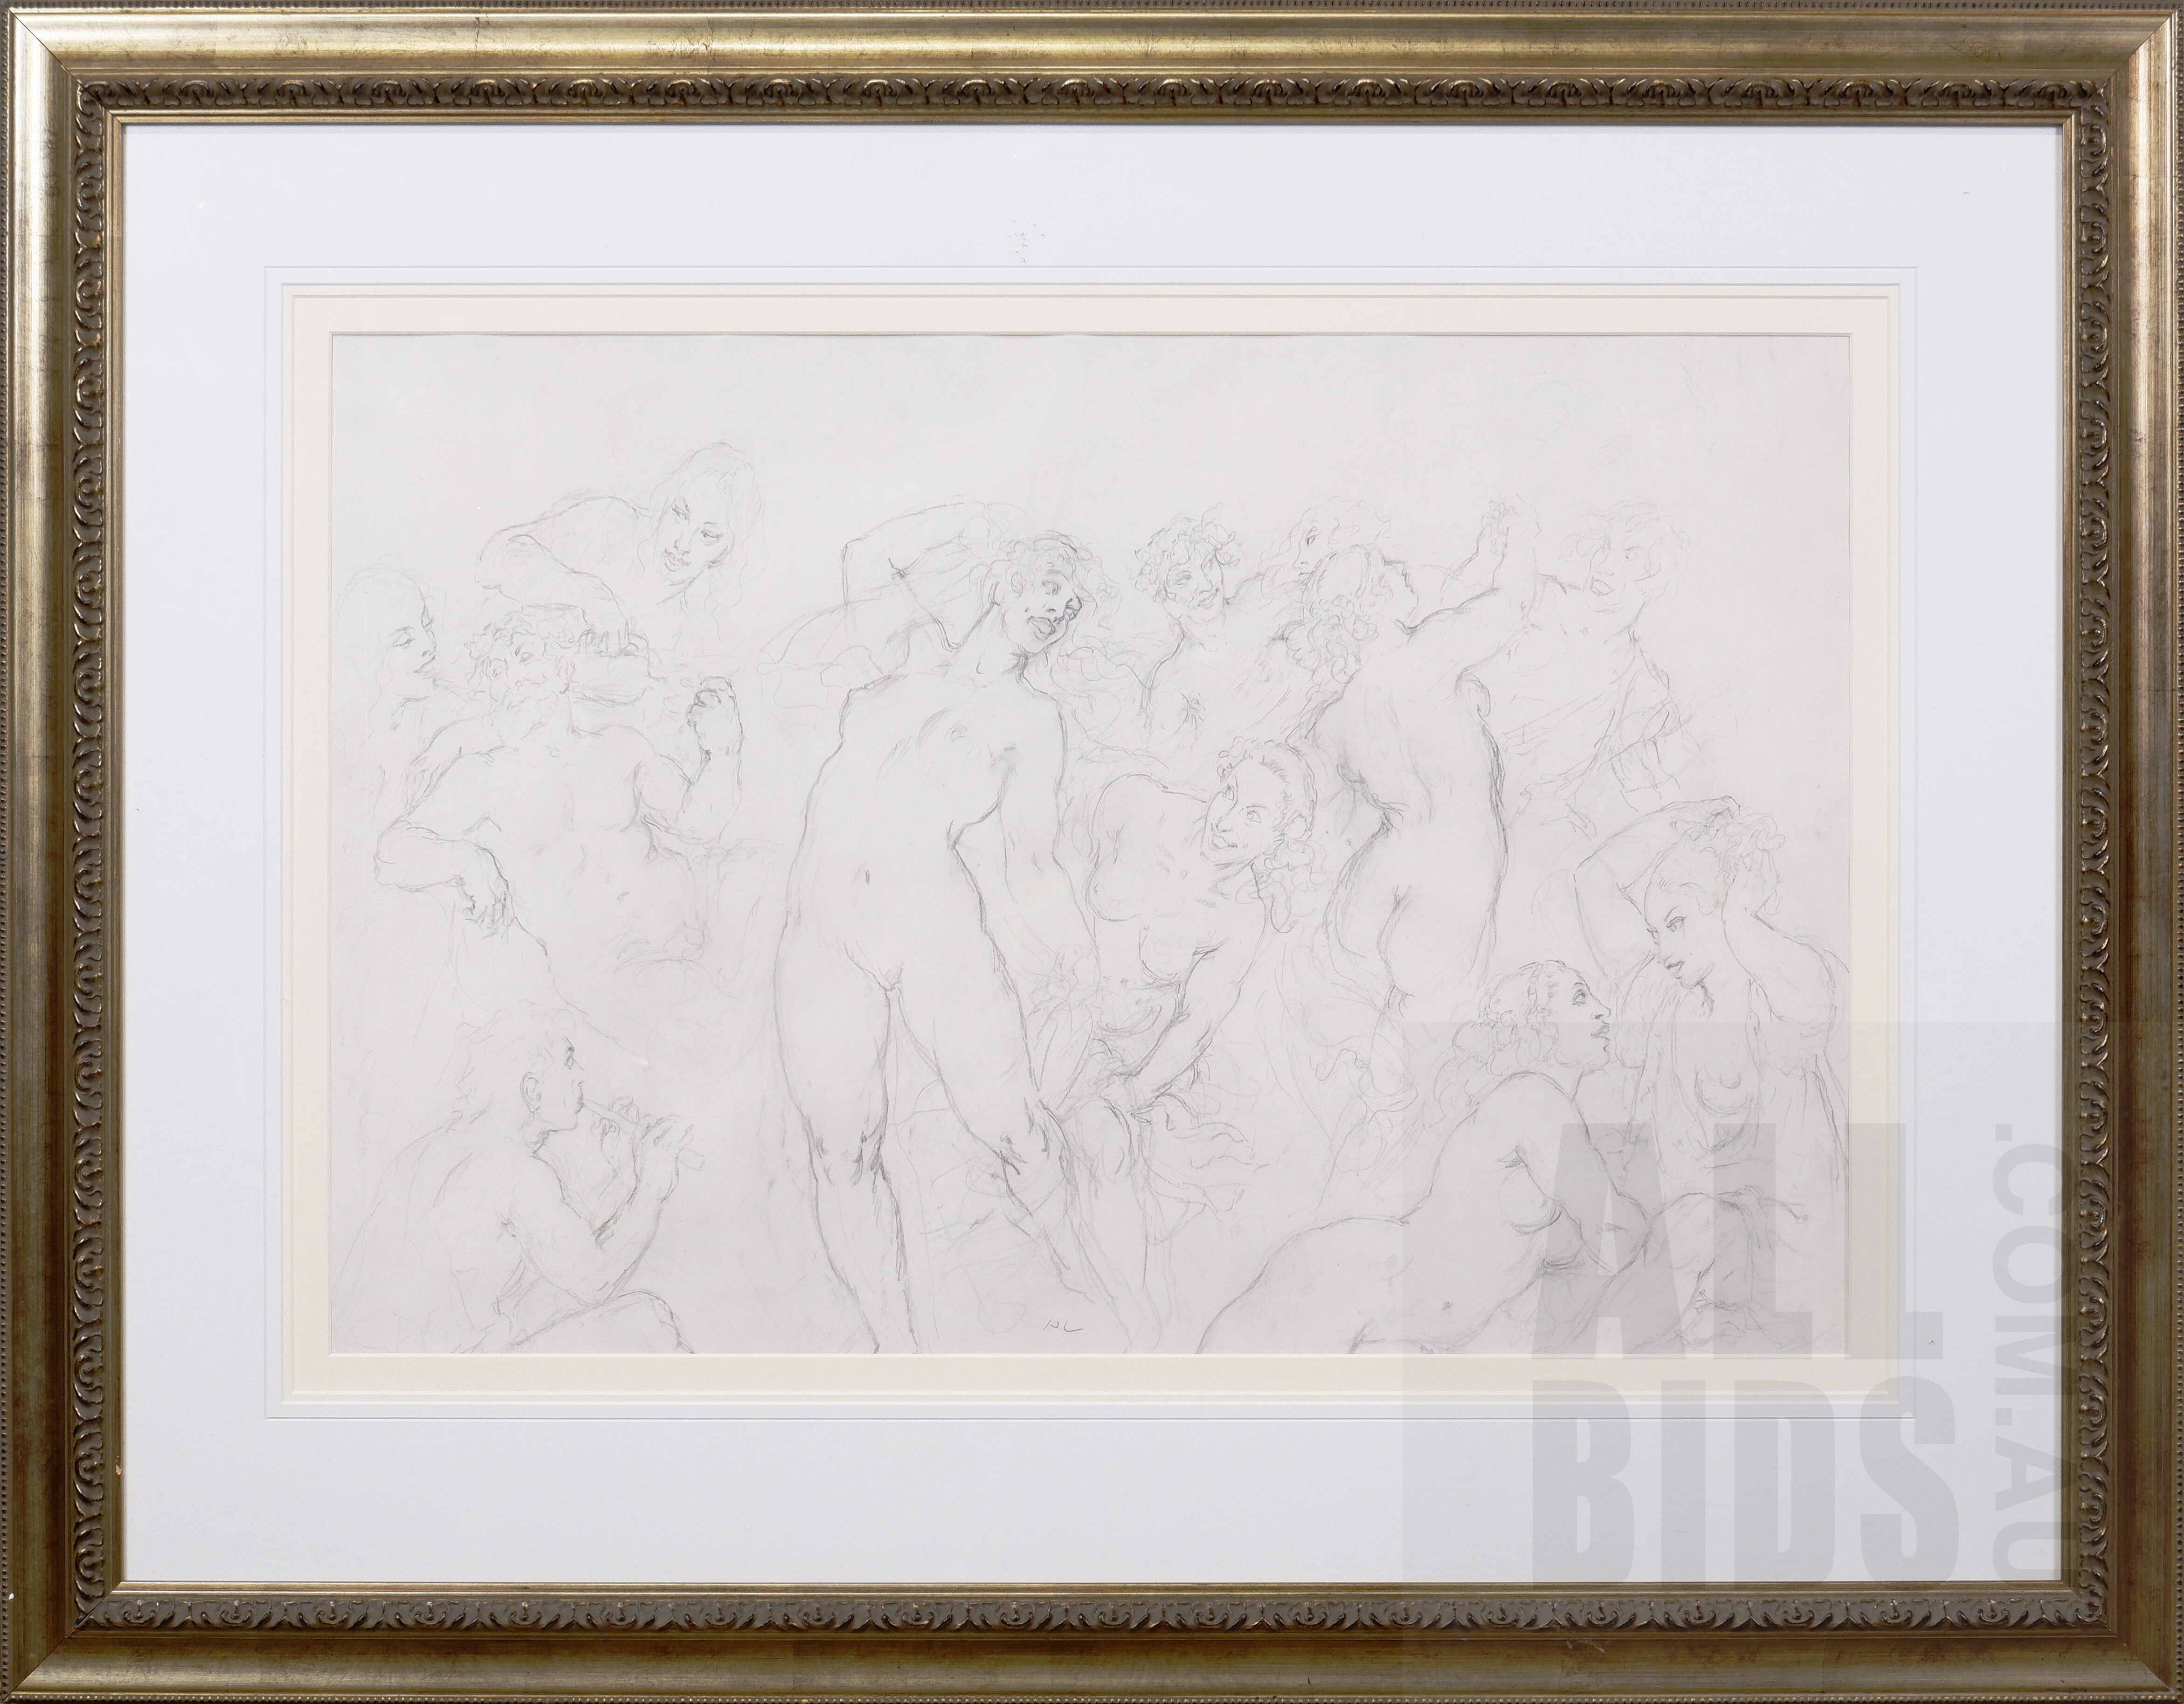 'Norman Lindsay (1879-1969) The Revellers c1946, Pencil on Paper, 55 x 83 cm'